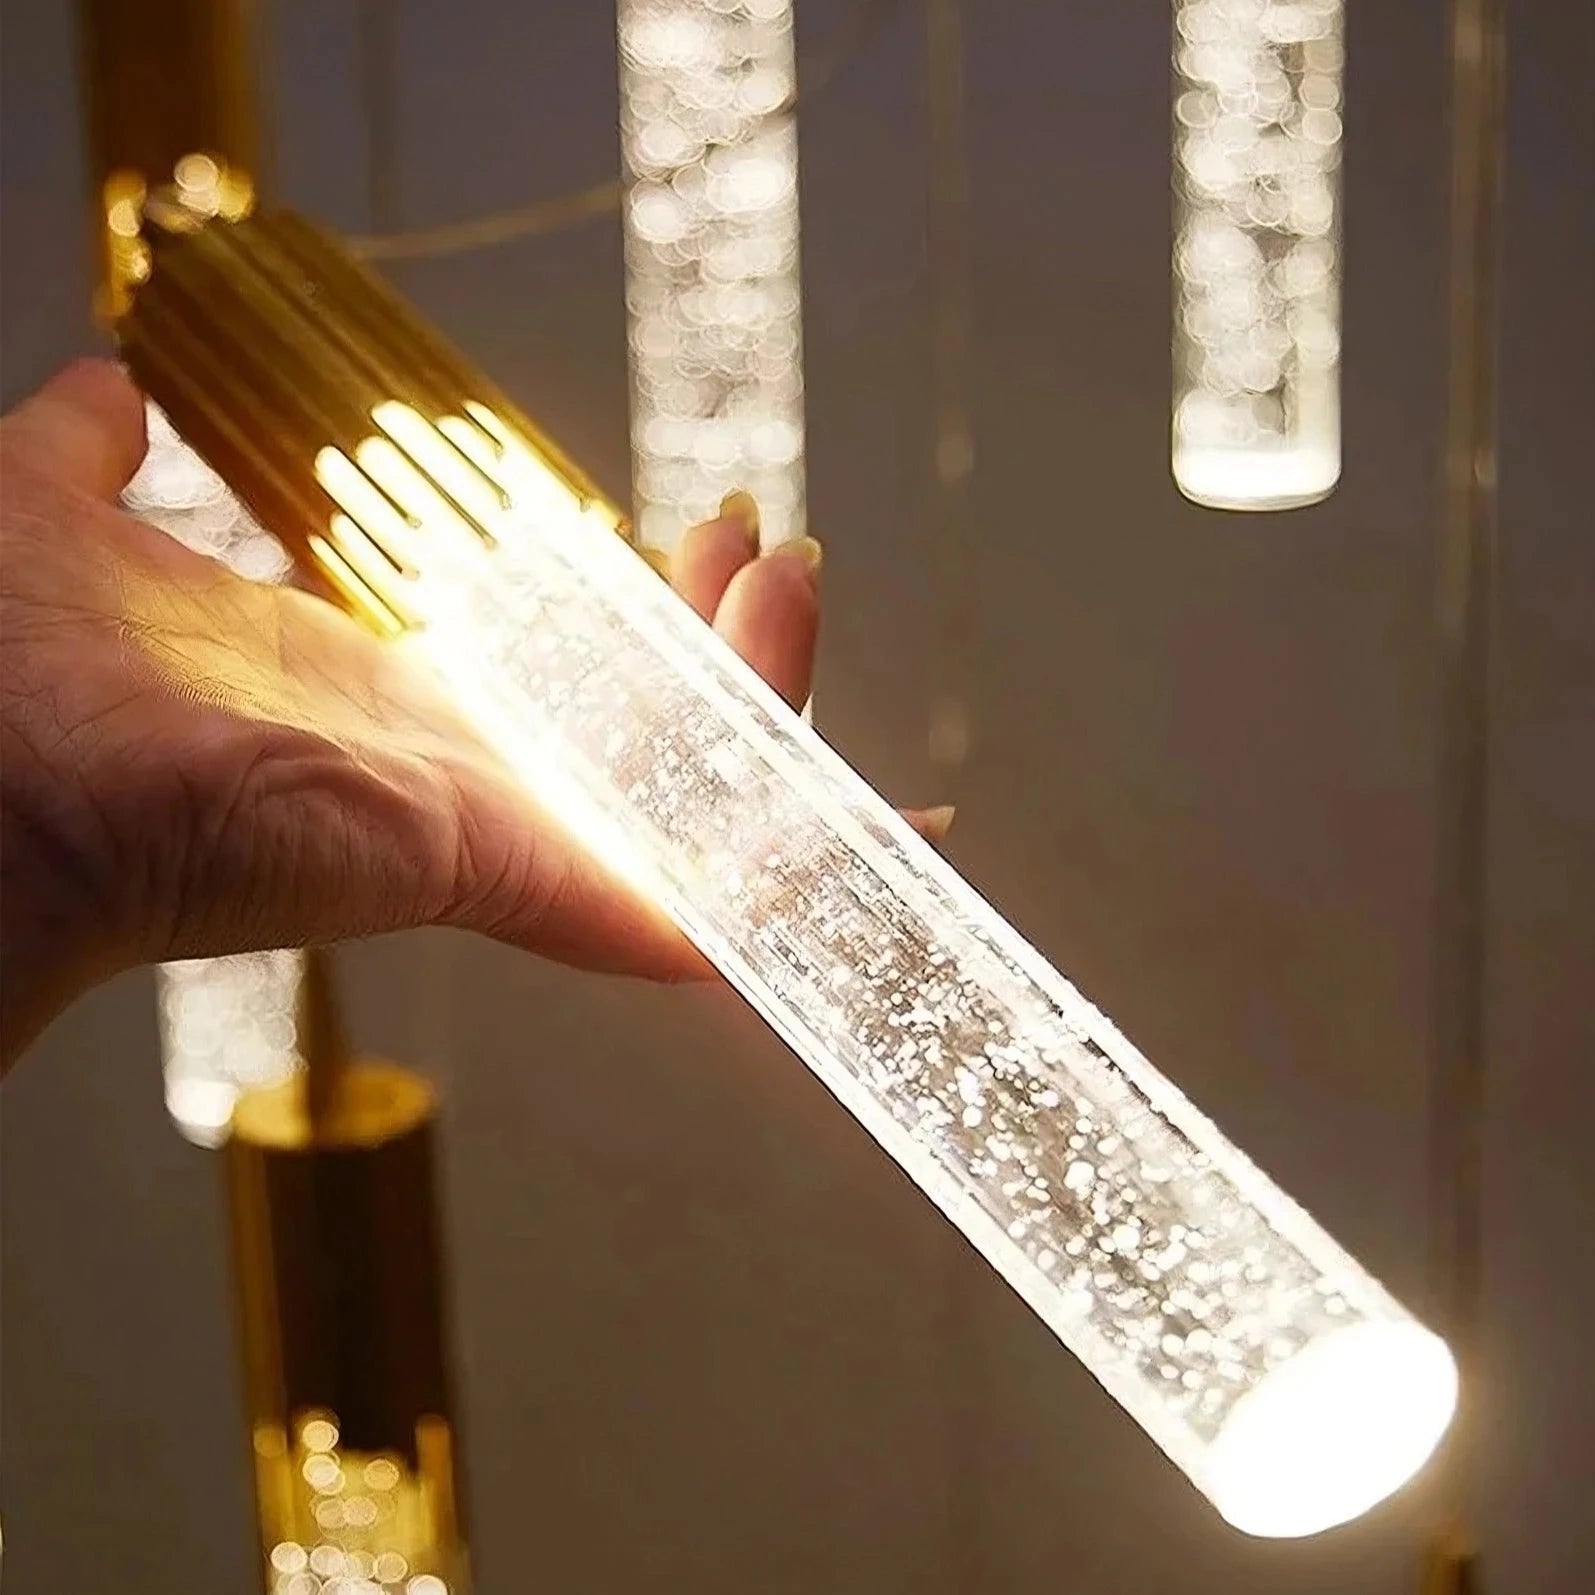 A person holds a glowing, cylindrical pendant light fixture made of K9 bubble crystal, with a polished gold finish that adds elegance. Several similar dimmable Modern Minimalist LED Pendant Lights hang in the background. The top text reads "Warm and Elegant Style," with "Product Details" in a black box. Brand Name: Morsale.com